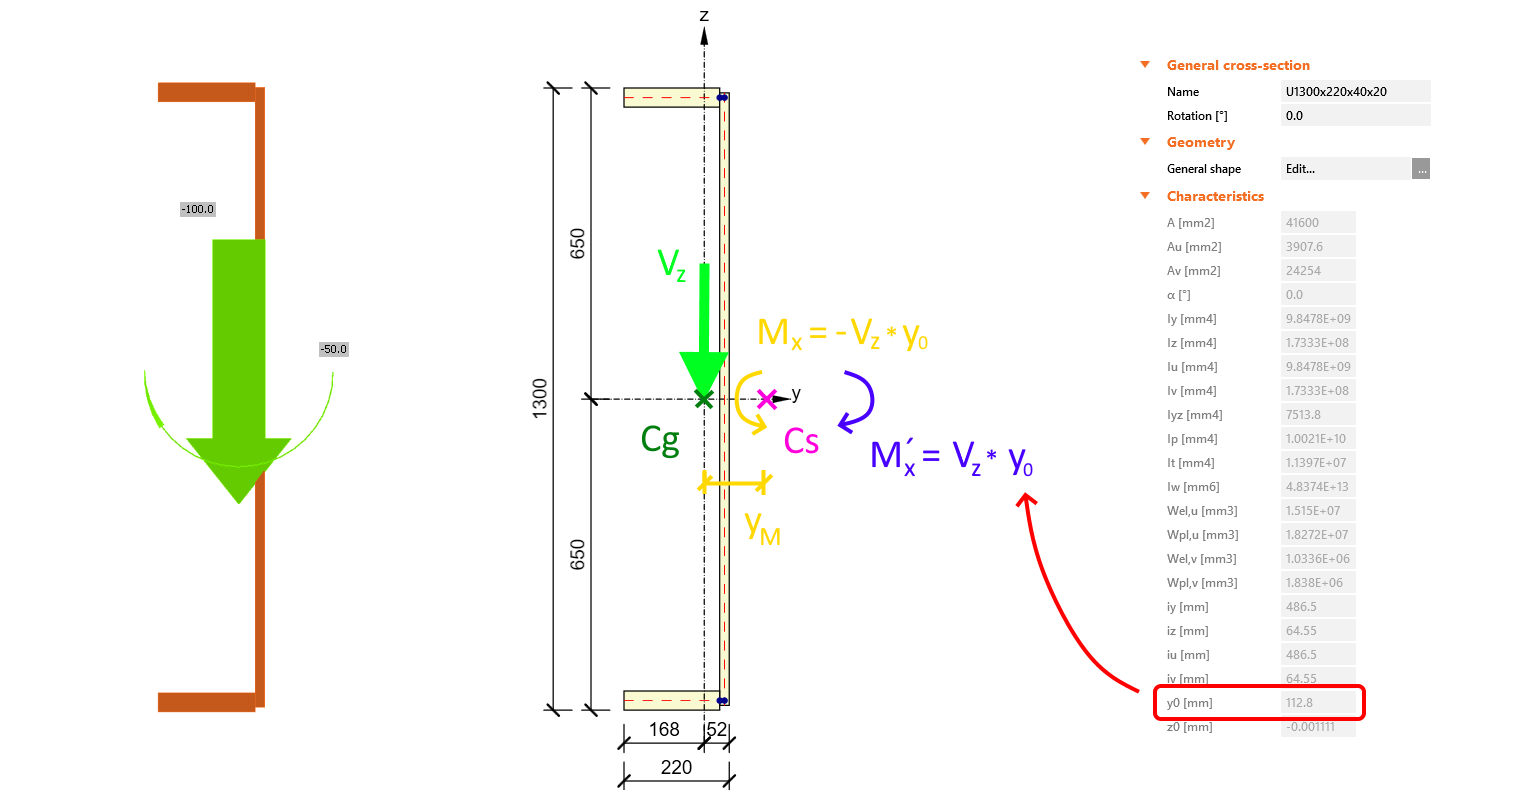 Torsion moment induced by eccentric shear force